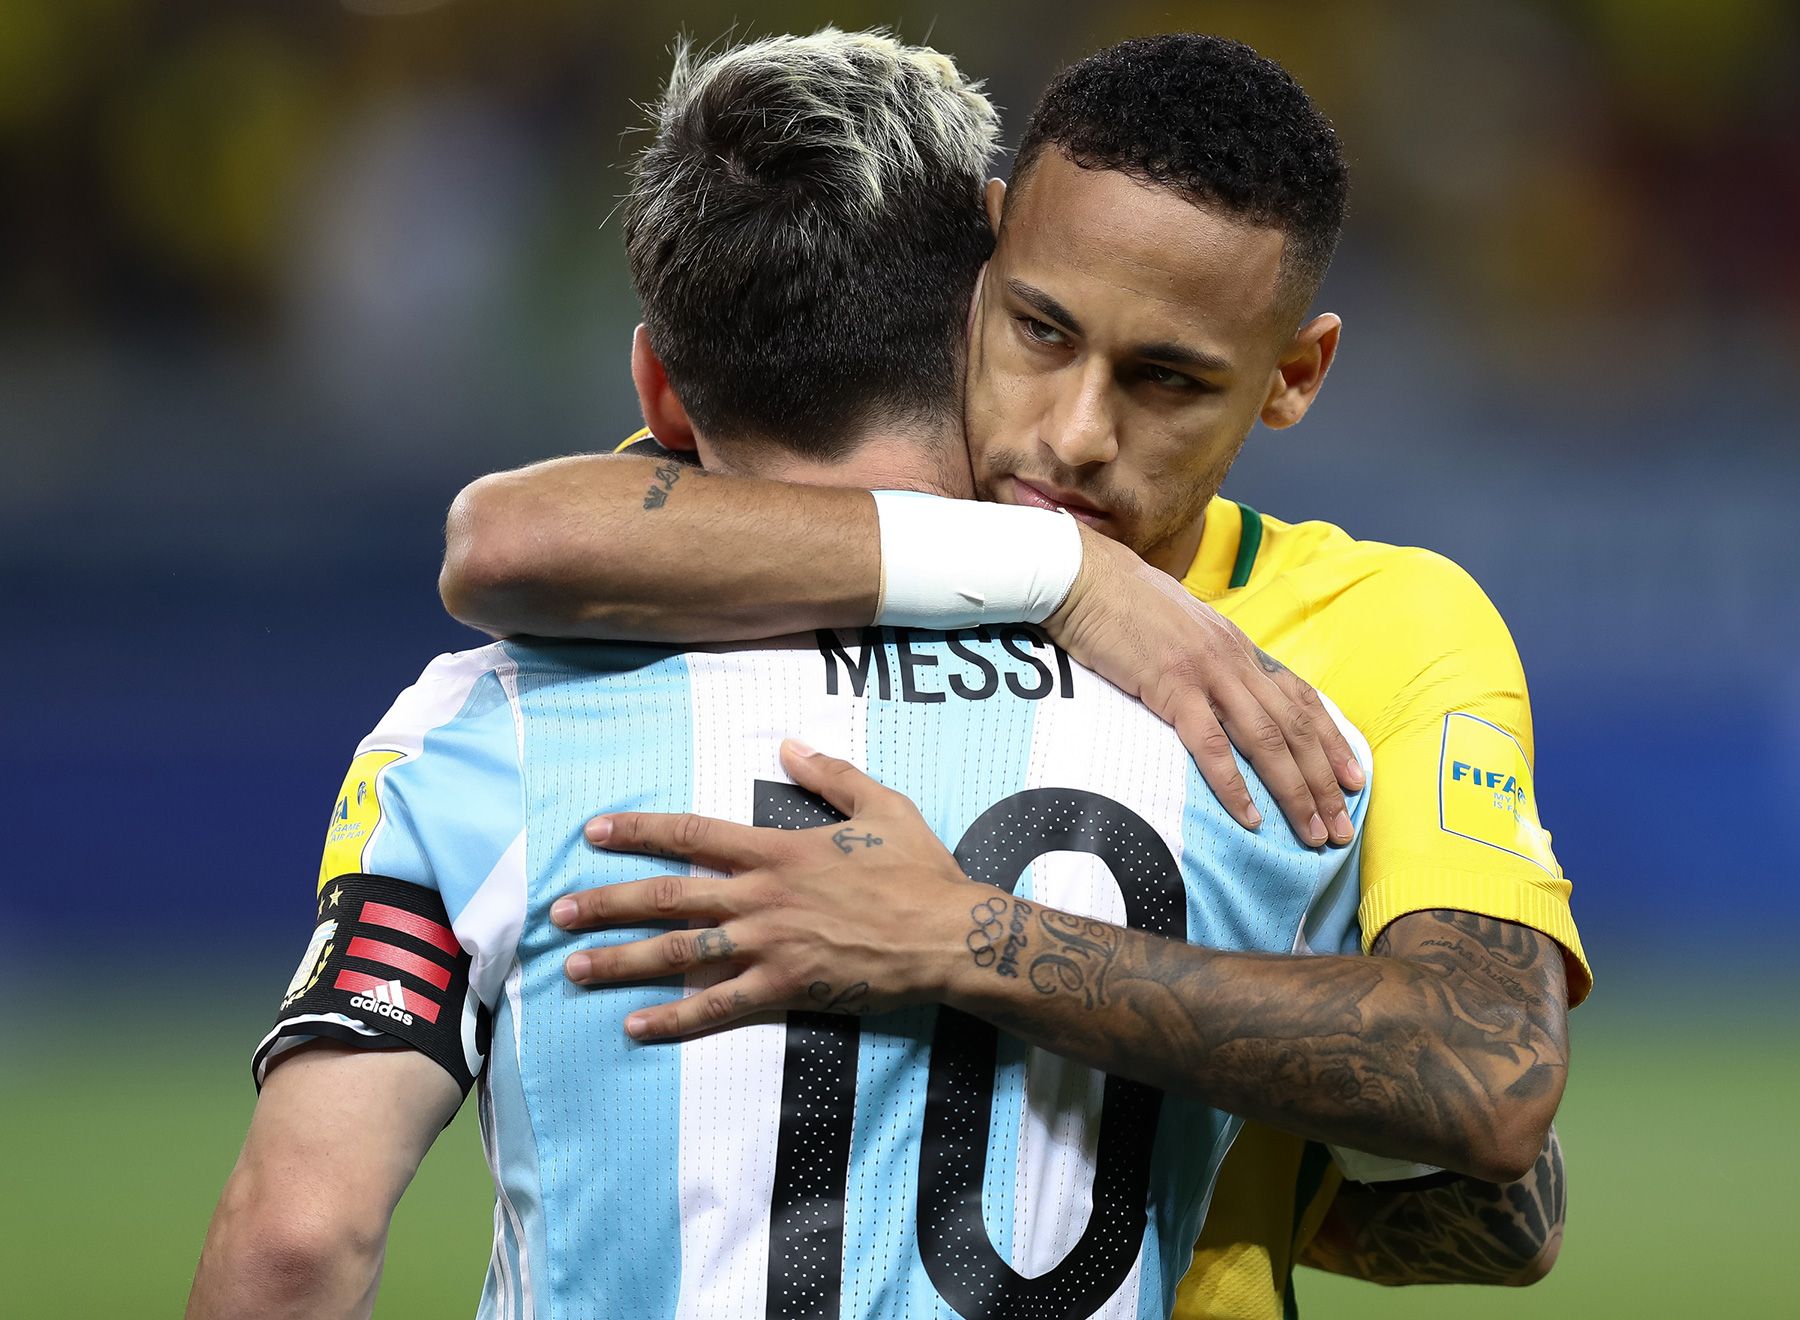 Neymar and Messi hug in a national team match